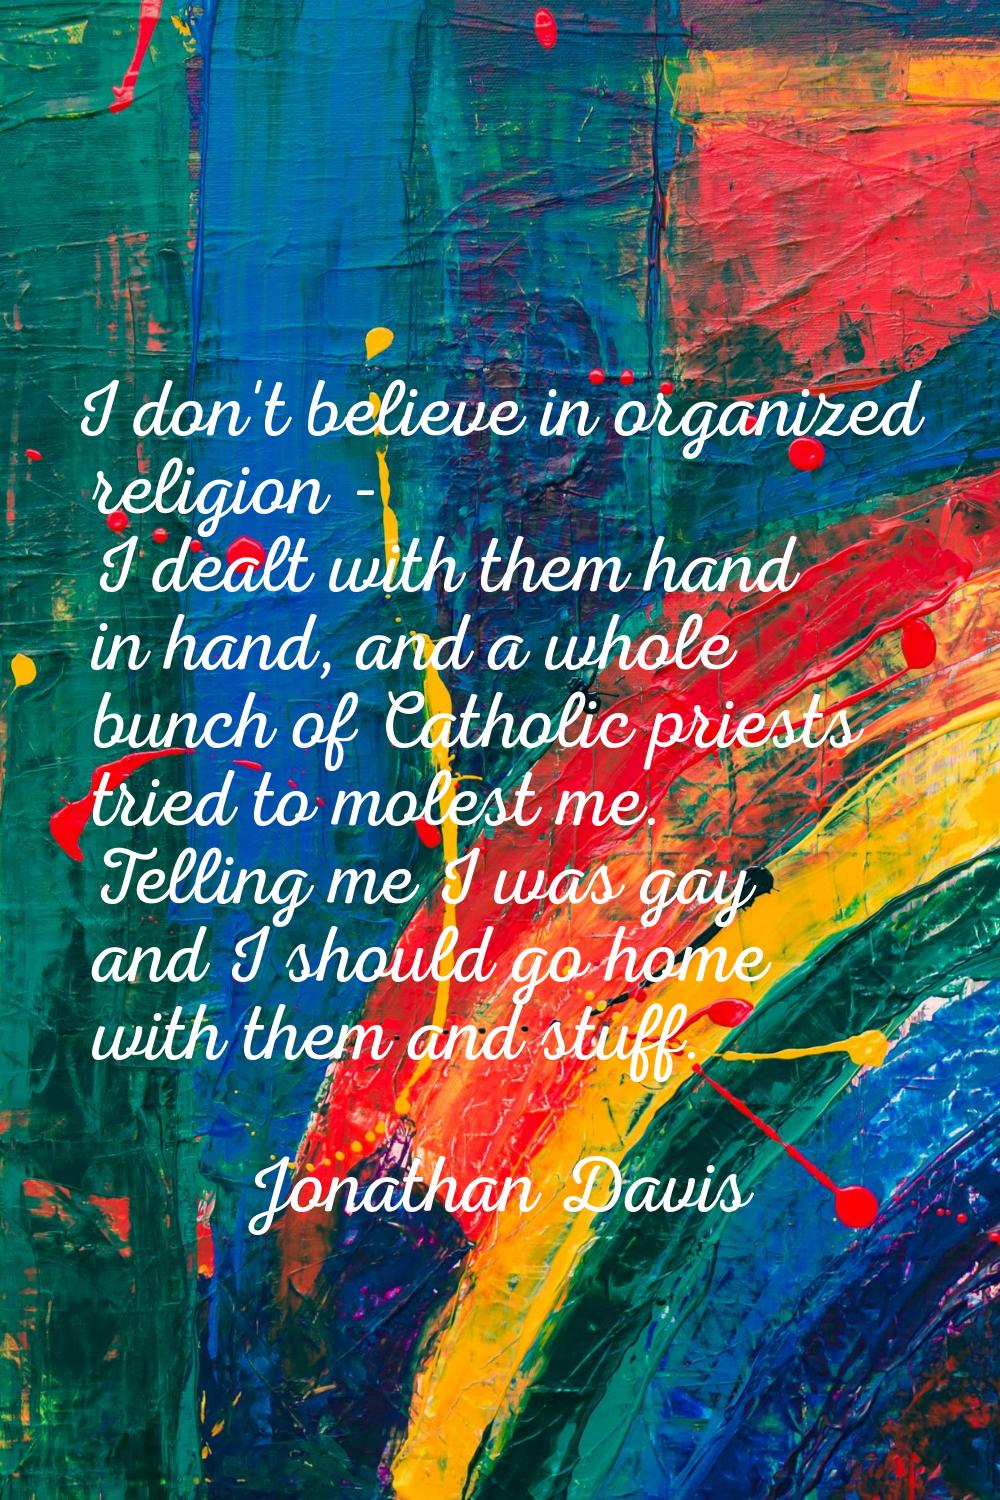 I don't believe in organized religion - I dealt with them hand in hand, and a whole bunch of Cathol